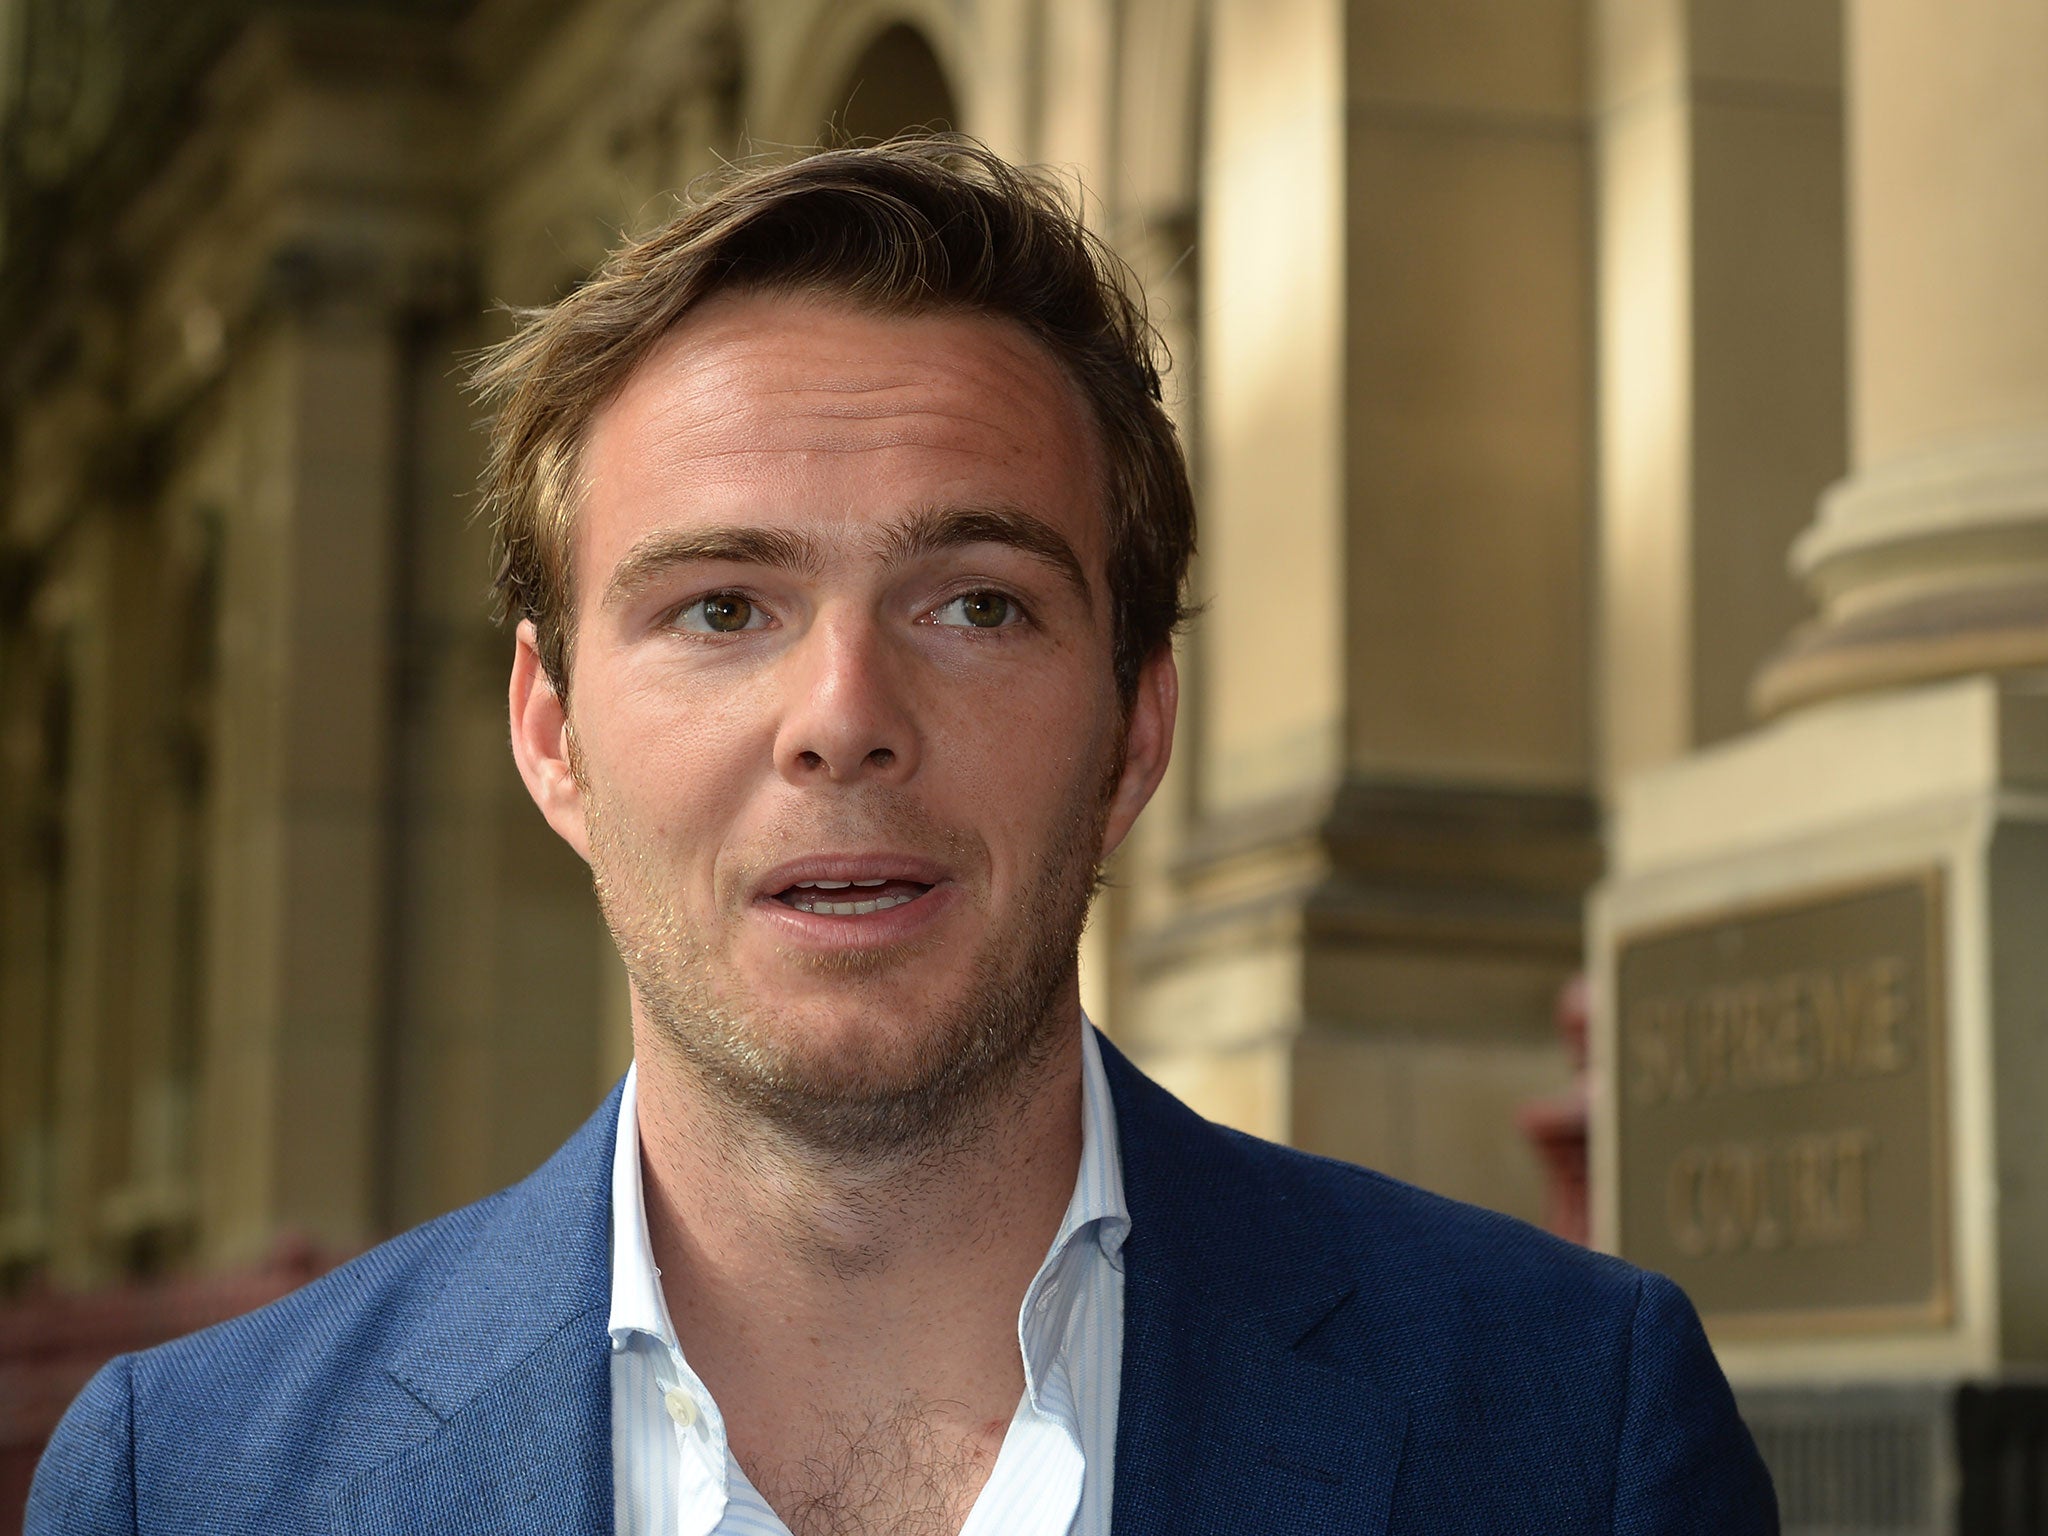 Giedo van der Garde contends that he has a contract to drive for Sauber this season